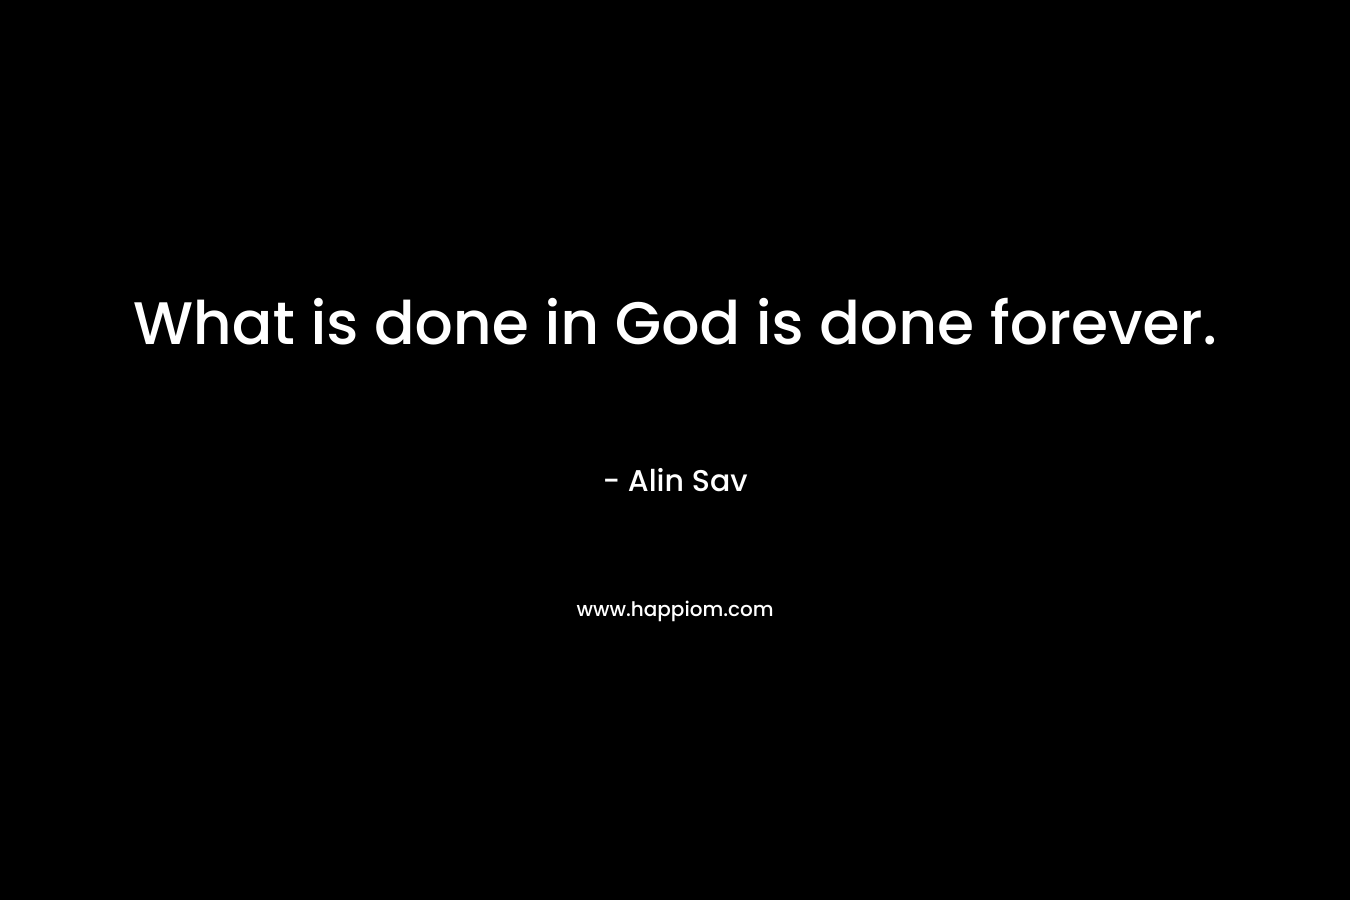 What is done in God is done forever.